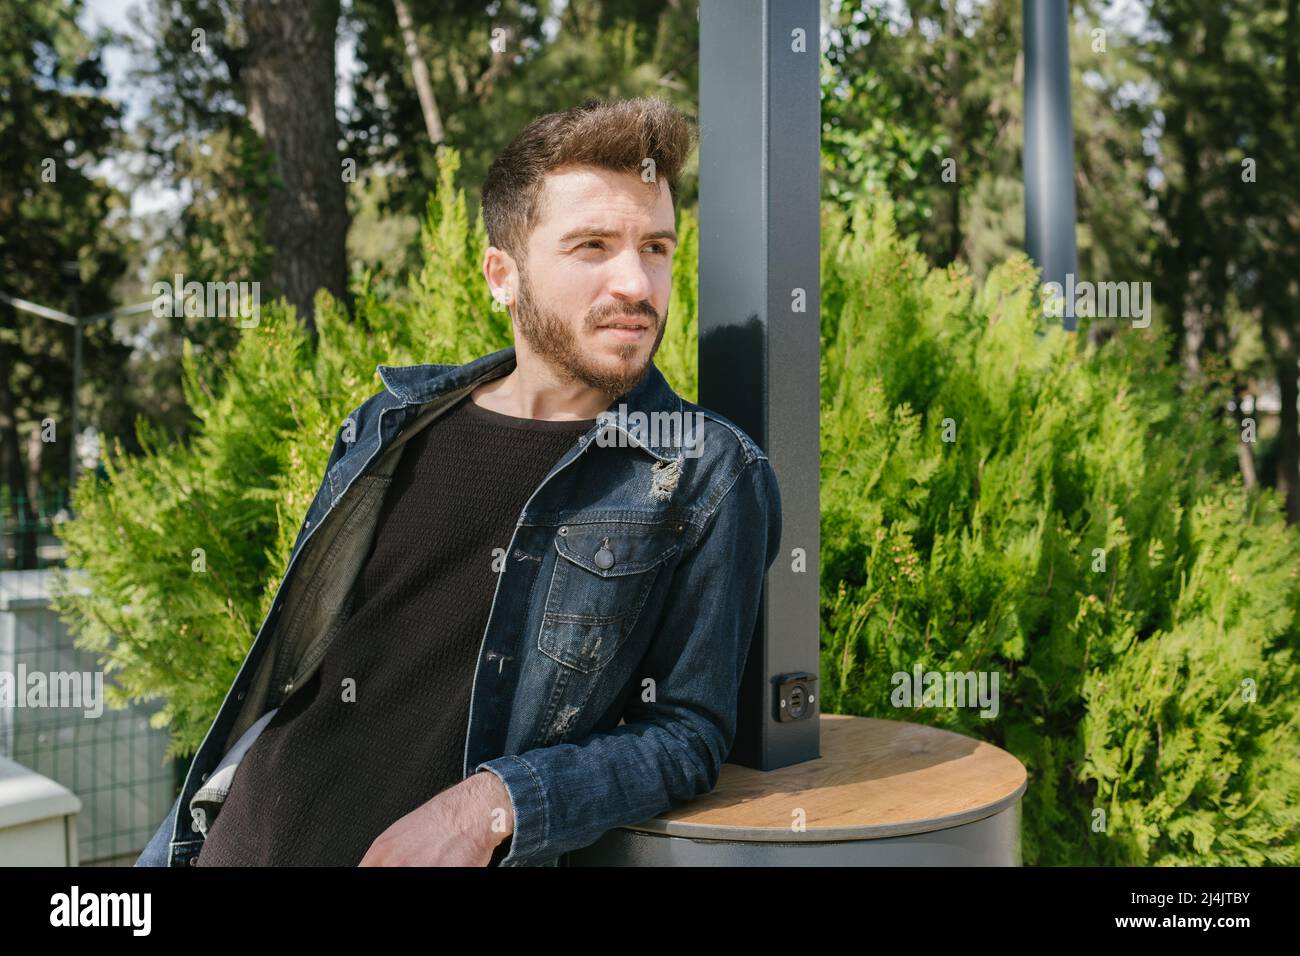 Leaning on the back, young man leans back on public charging station, tired of the heat and looking for a place to rest Stock Photo